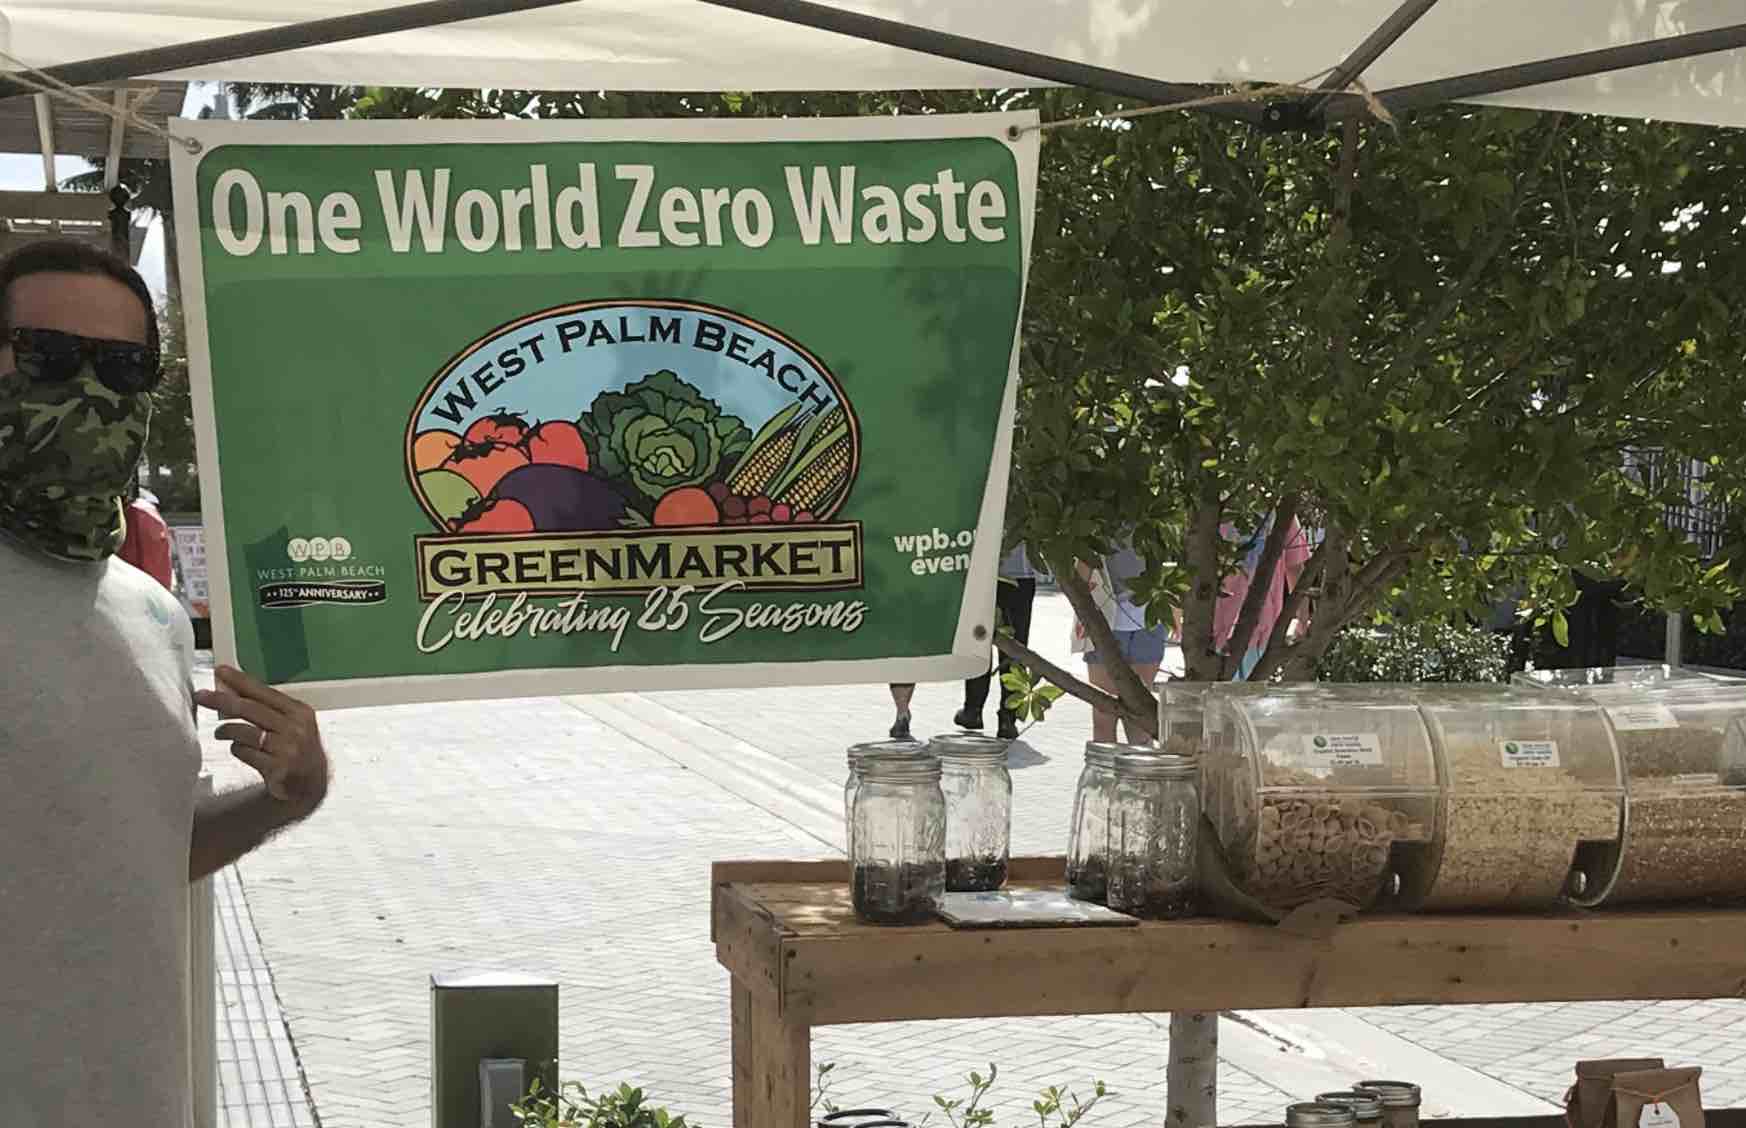 Our Visit to One World Zero Waste